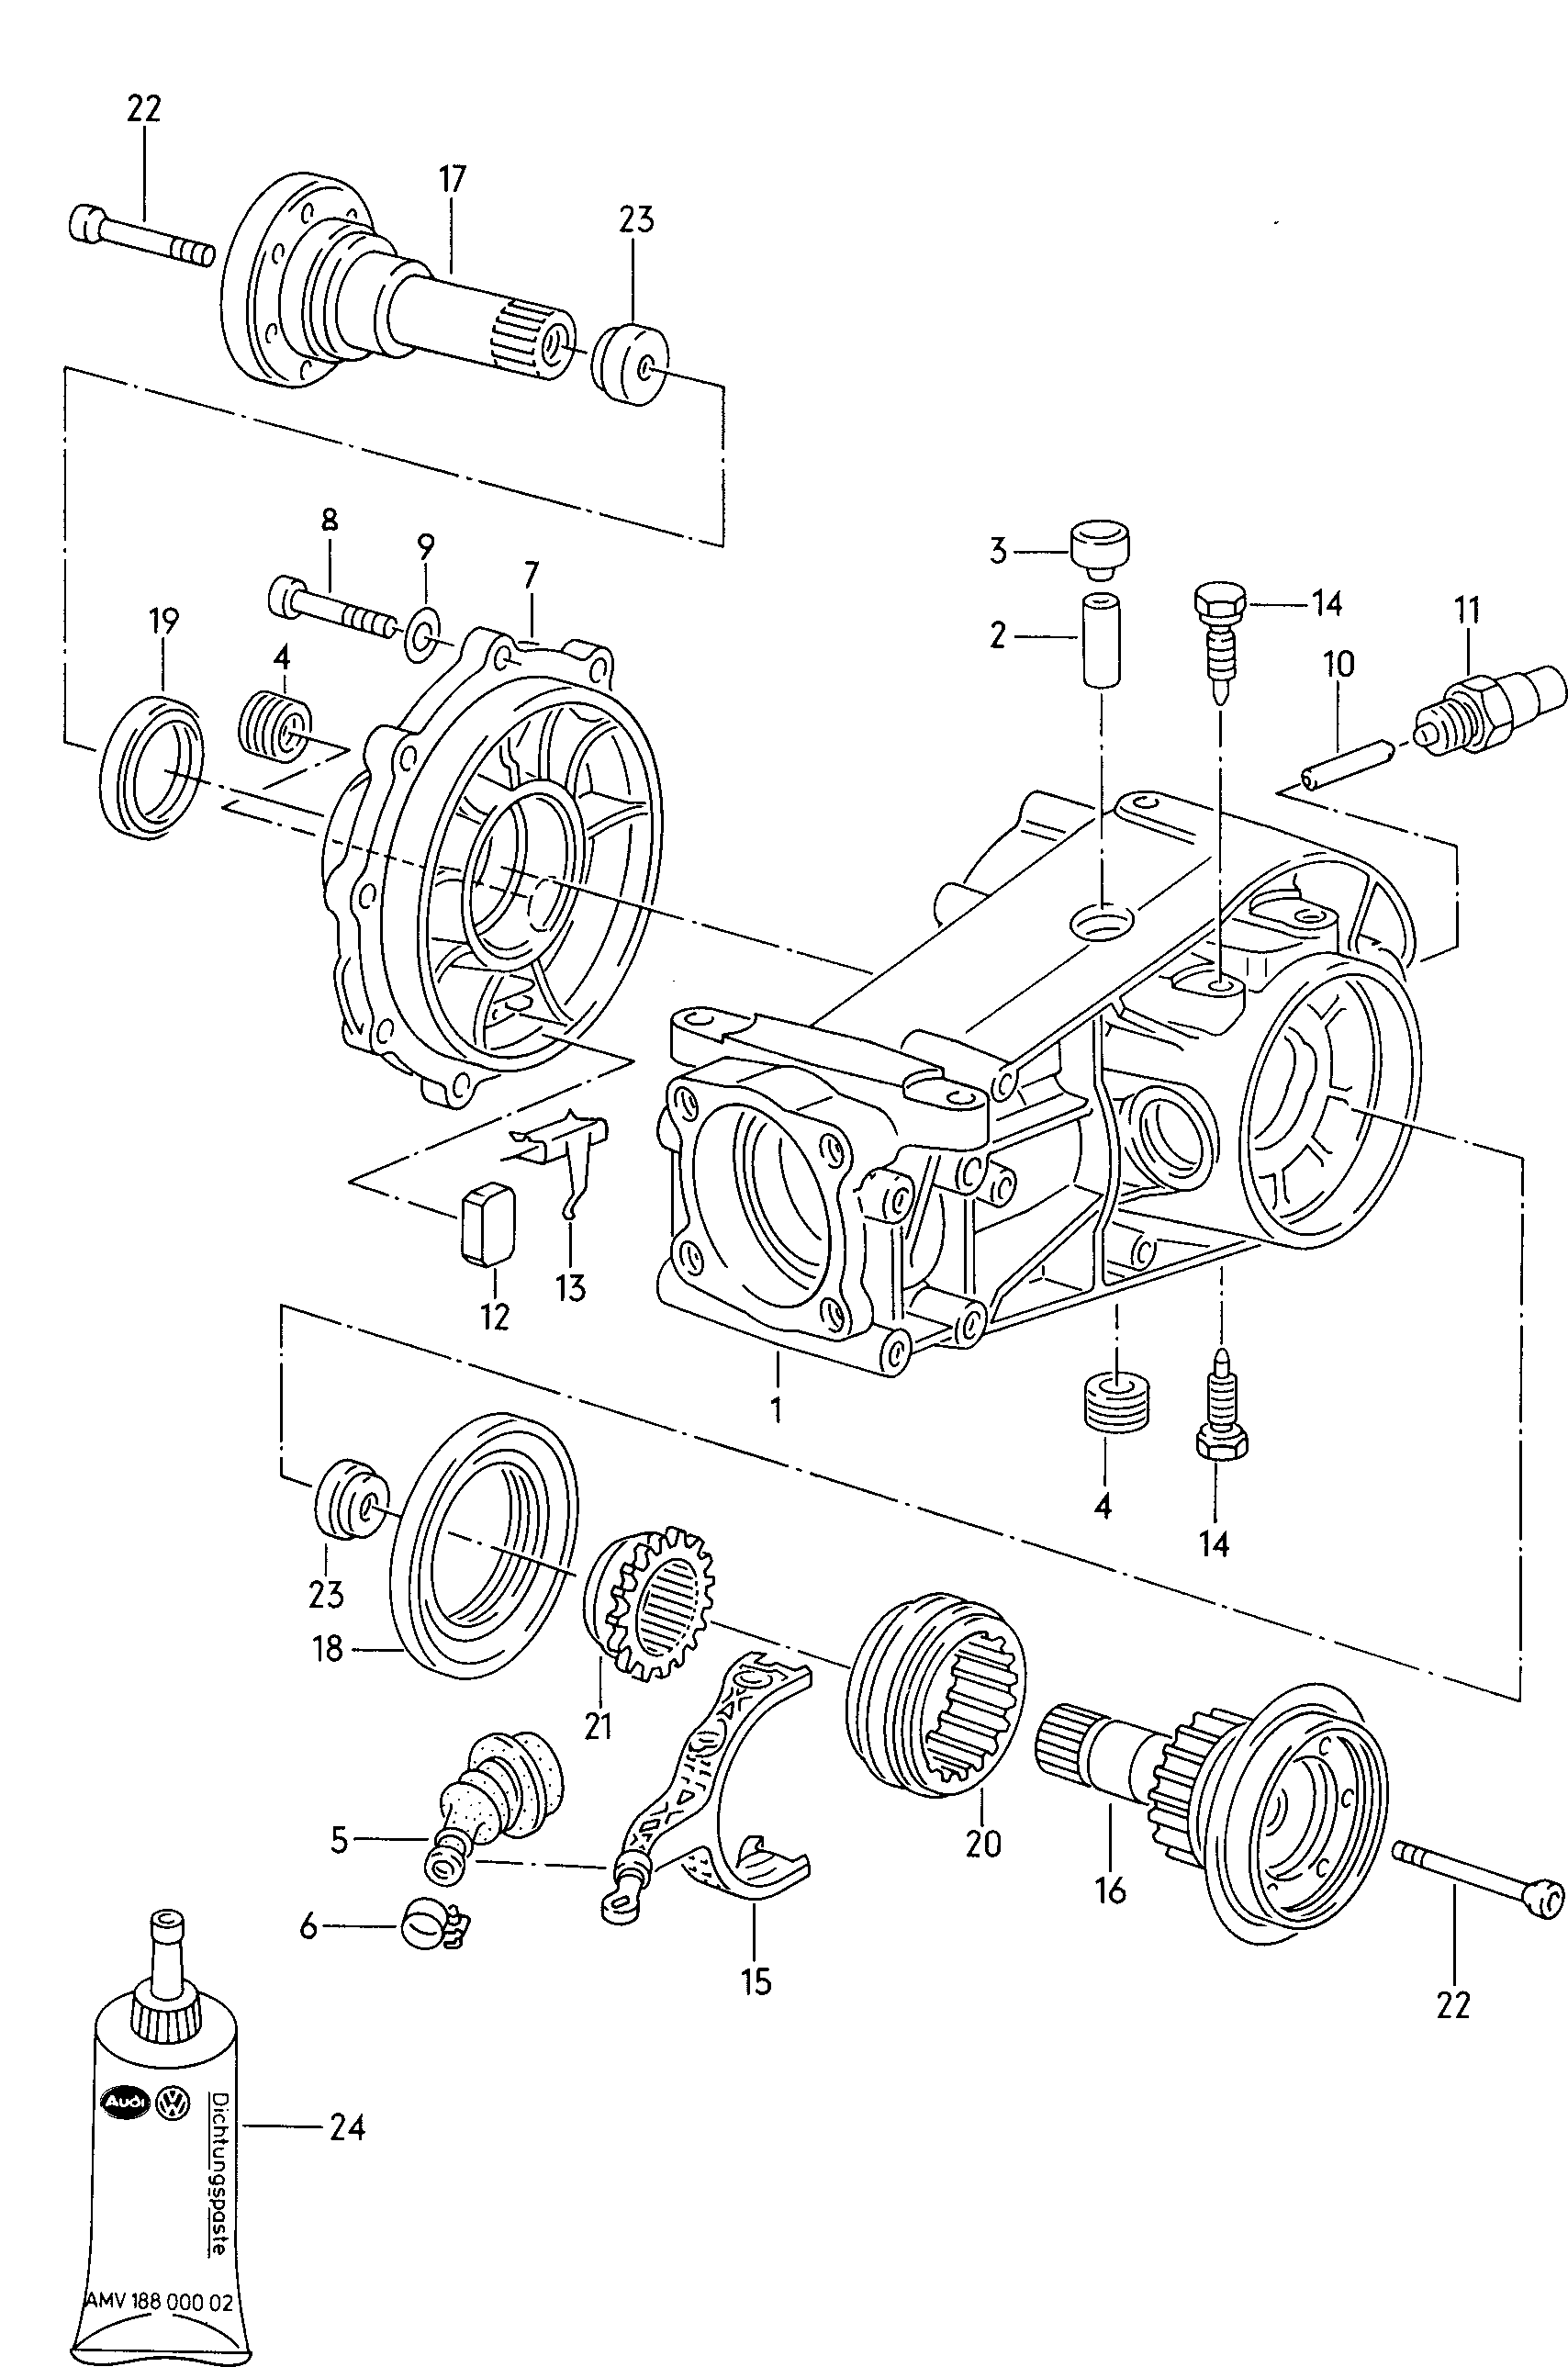 rear axle housing; limited slip differential - Audi Coupe quattro(ACOQ)  